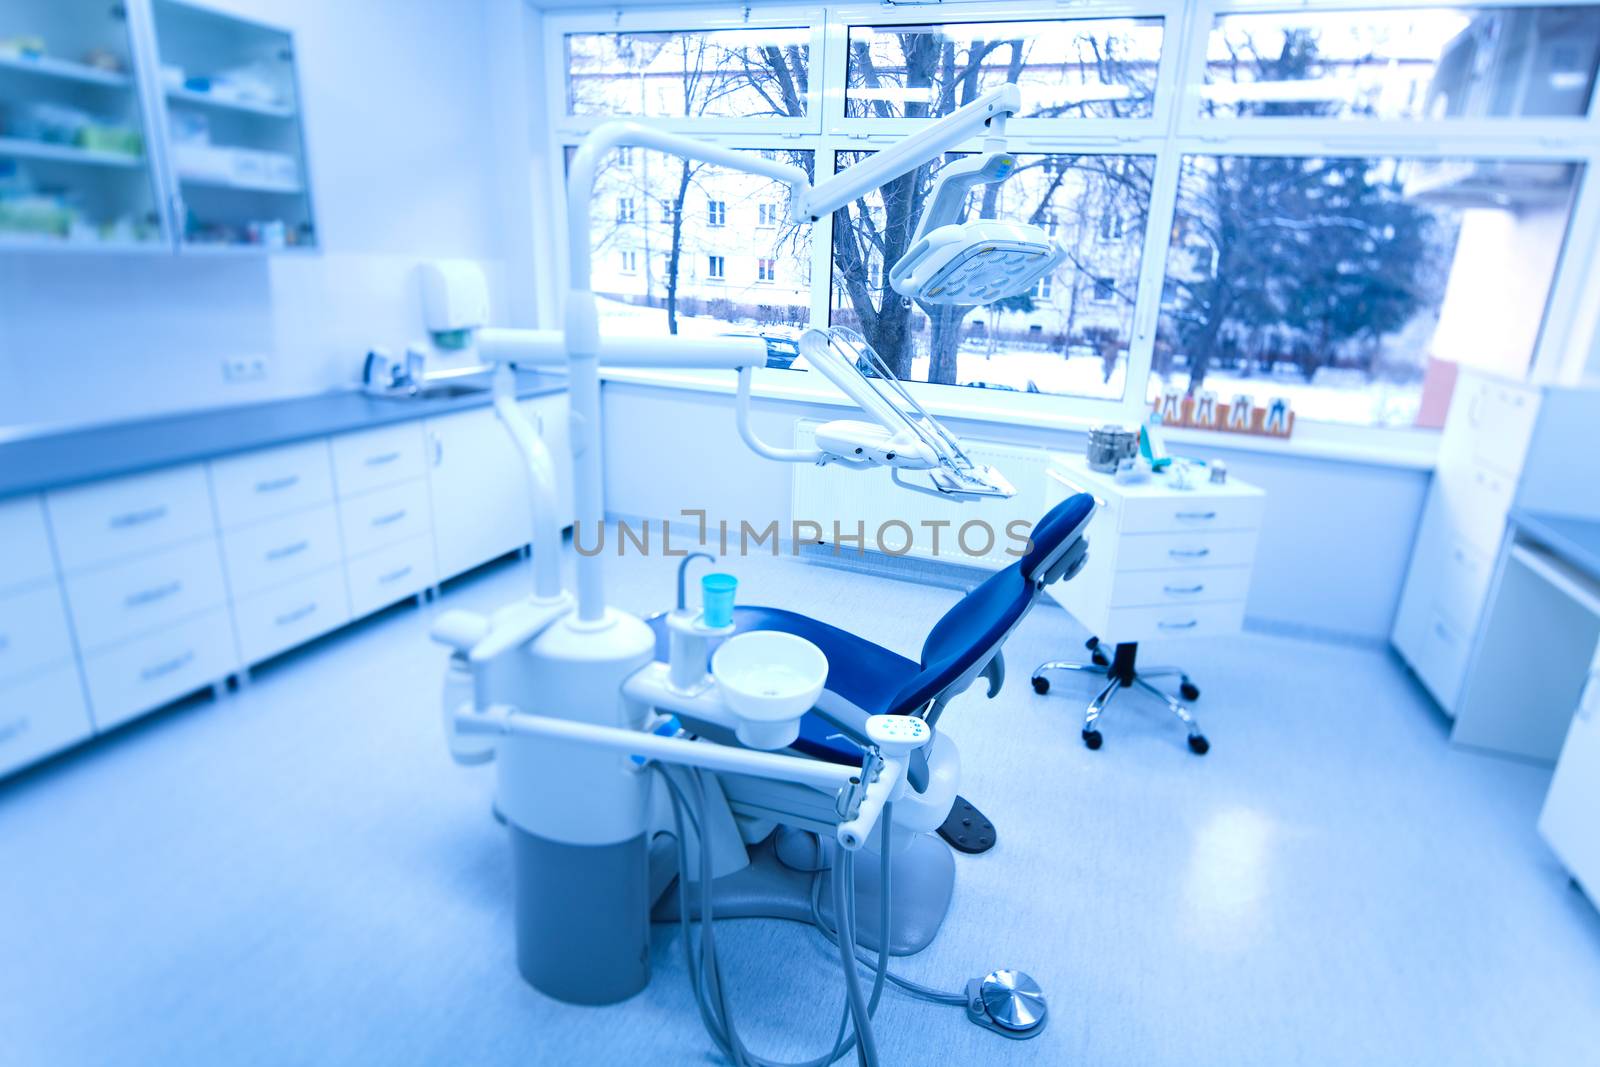 Dental office, bright colorful tone concept by JanPietruszka